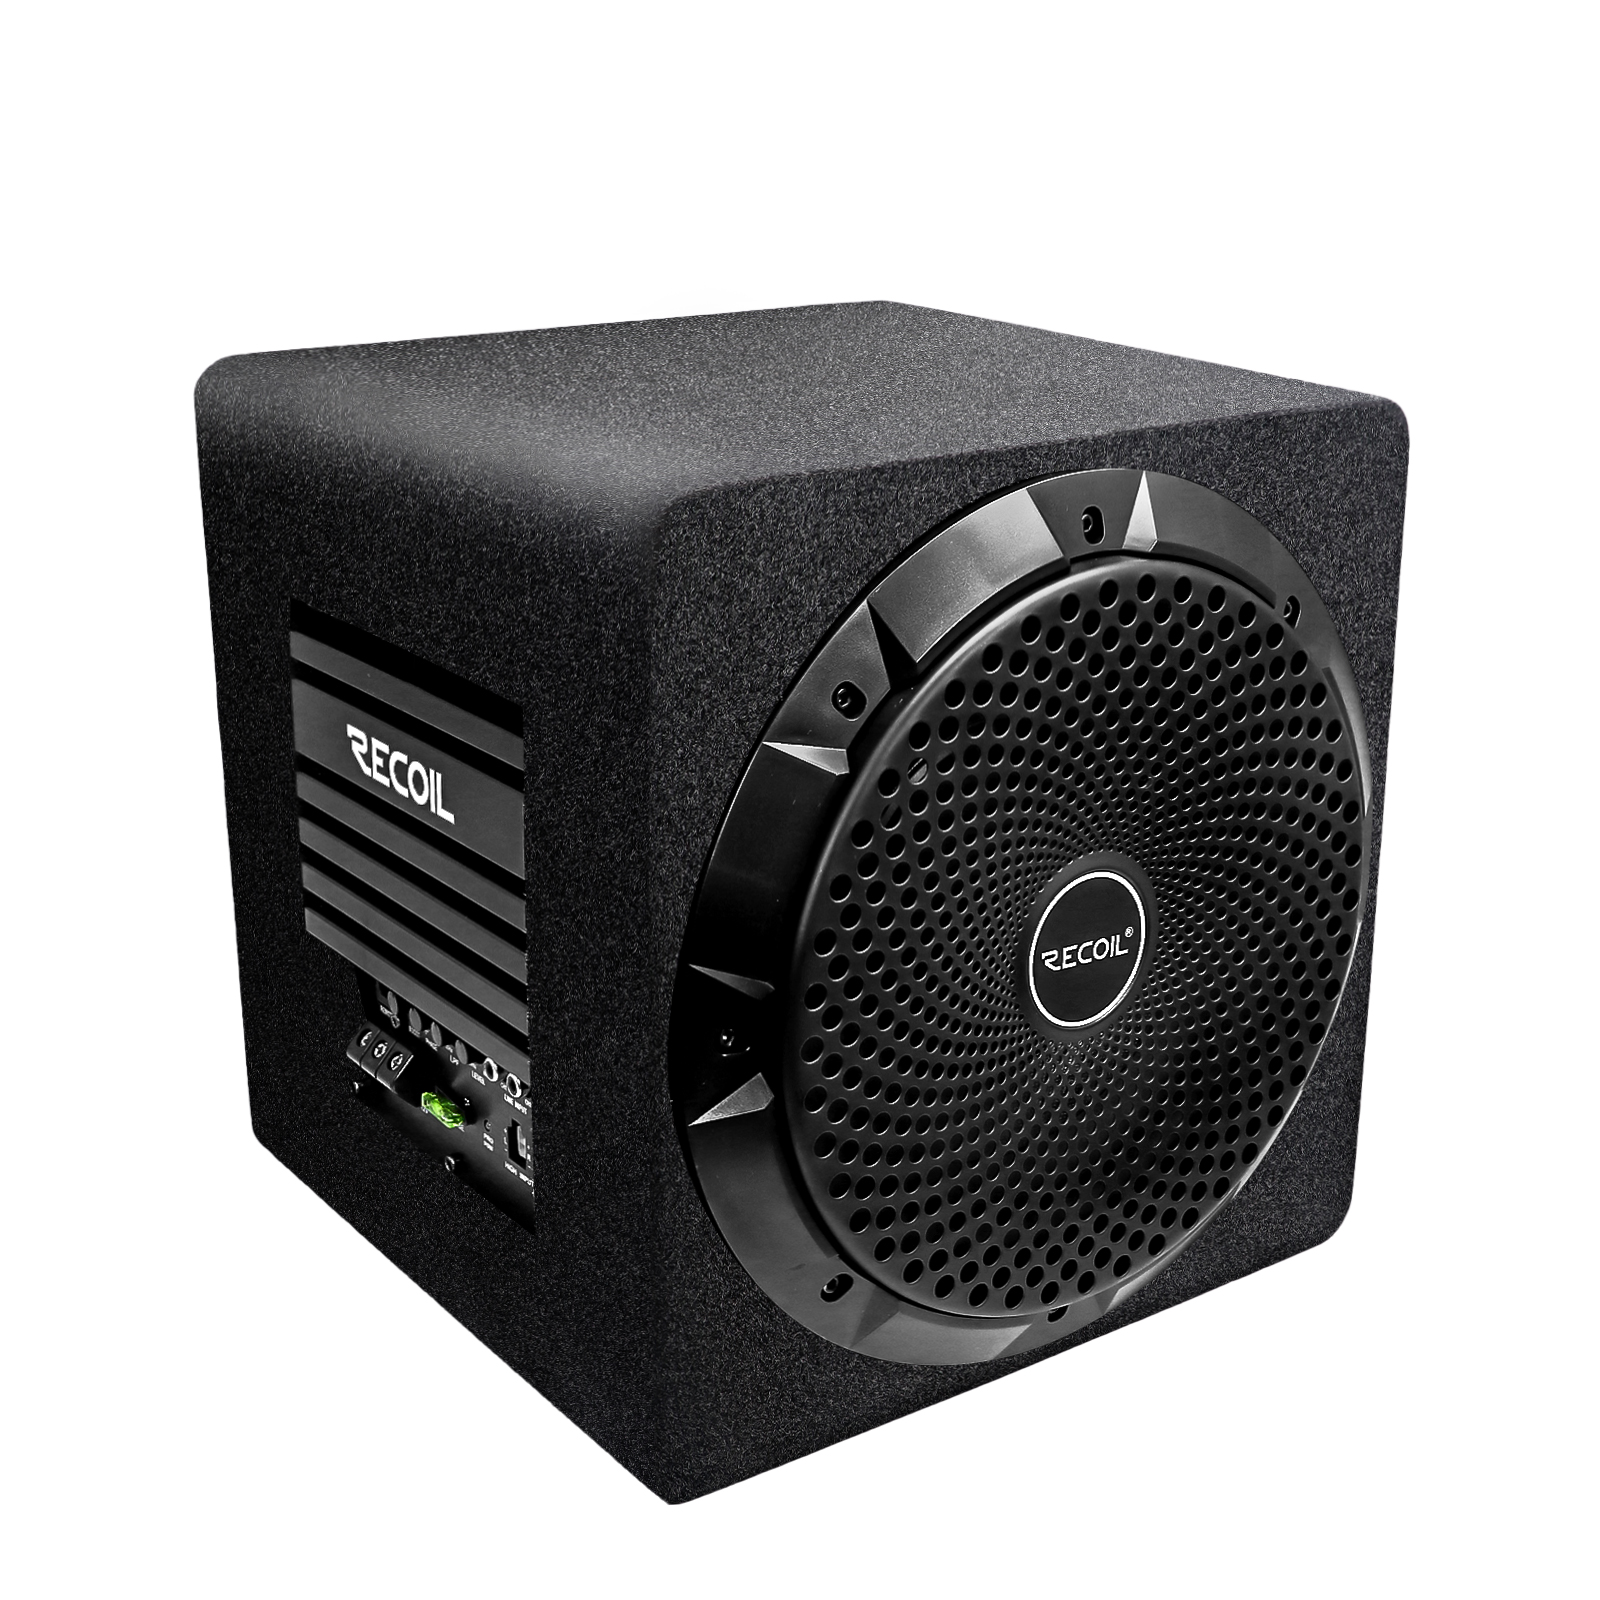 Recoil 10-inch (250mm) Active Subwoofer with Passive Radiator and Built-in 600W Amplifier